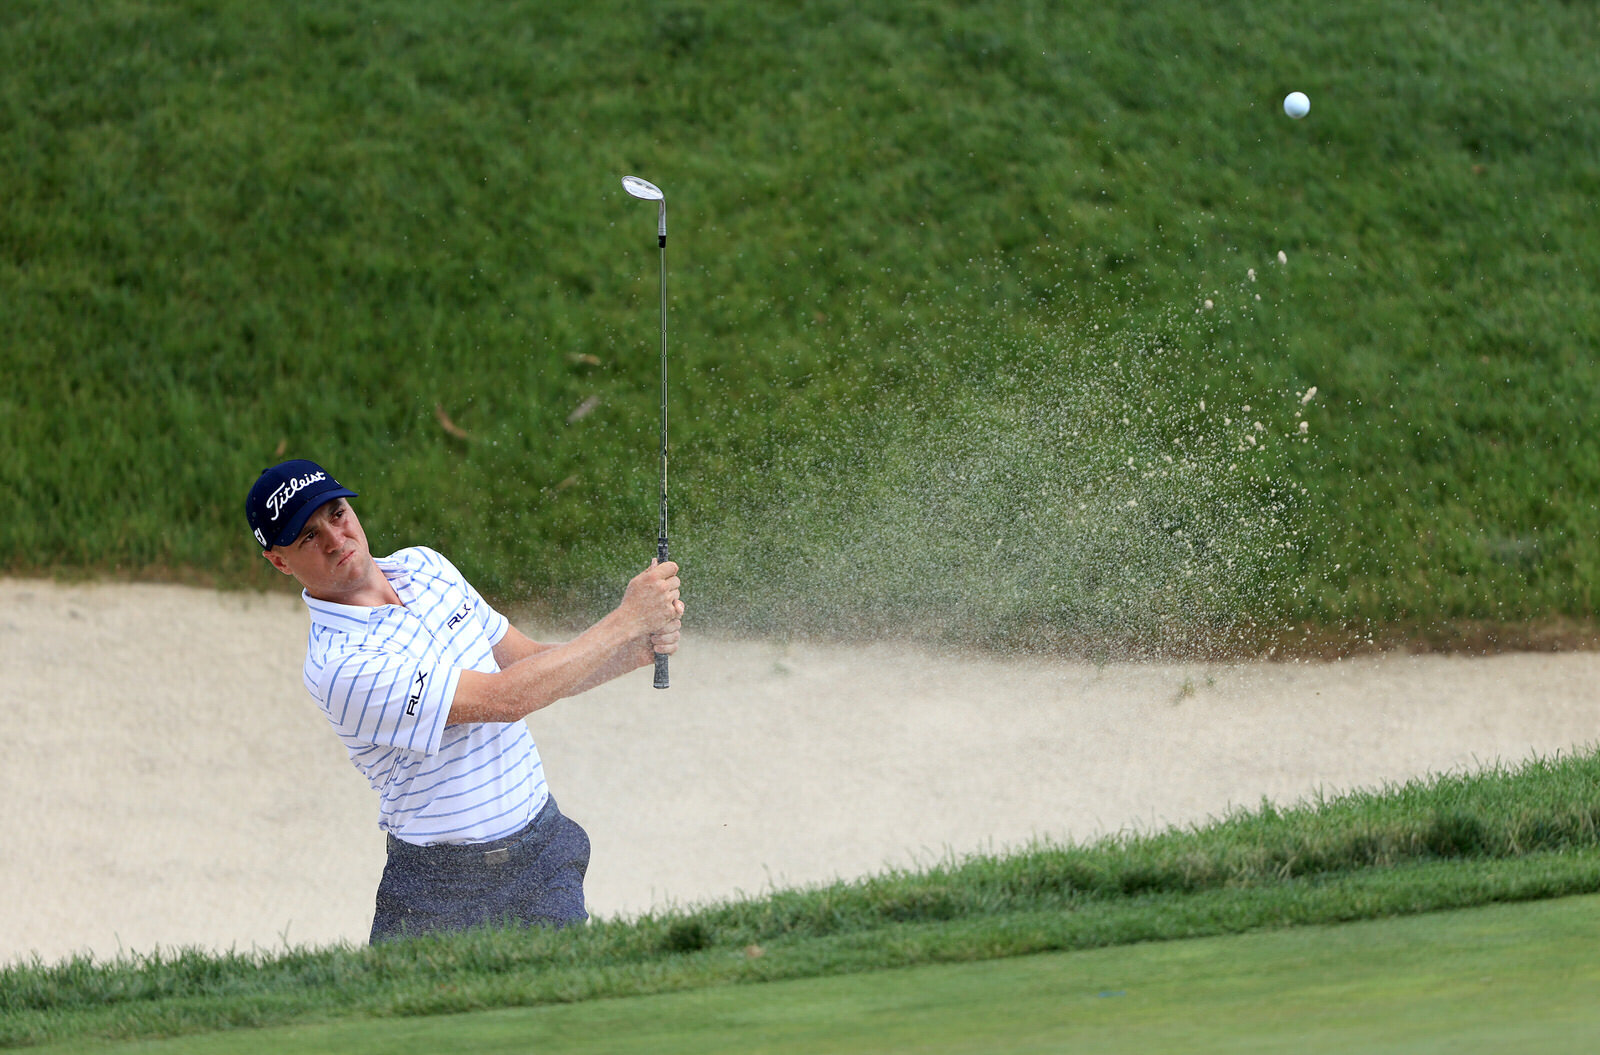  DUBLIN, OHIO - JULY 11: Justin Thomas of the United States plays a shot from a bunker on the 16th hole during the third round of the Workday Charity Open on July 11, 2020 at Muirfield Village Golf Club in Dublin, Ohio. (Photo by Sam Greenwood/Getty 